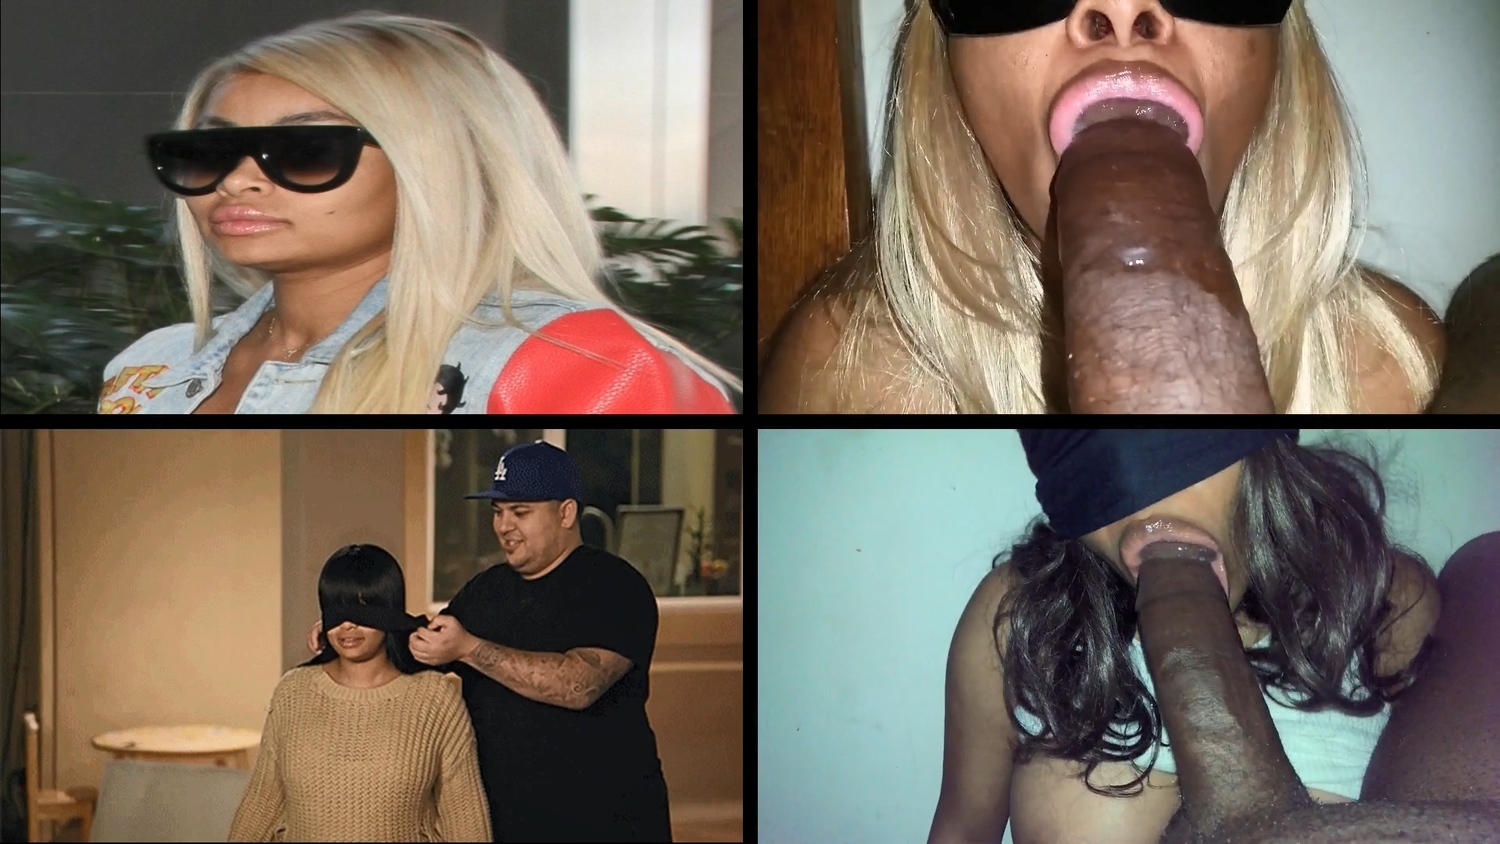 Watch Blac Chyna Challenge Pt 2 by Dominican Lipz- Dslaf video on xHamster